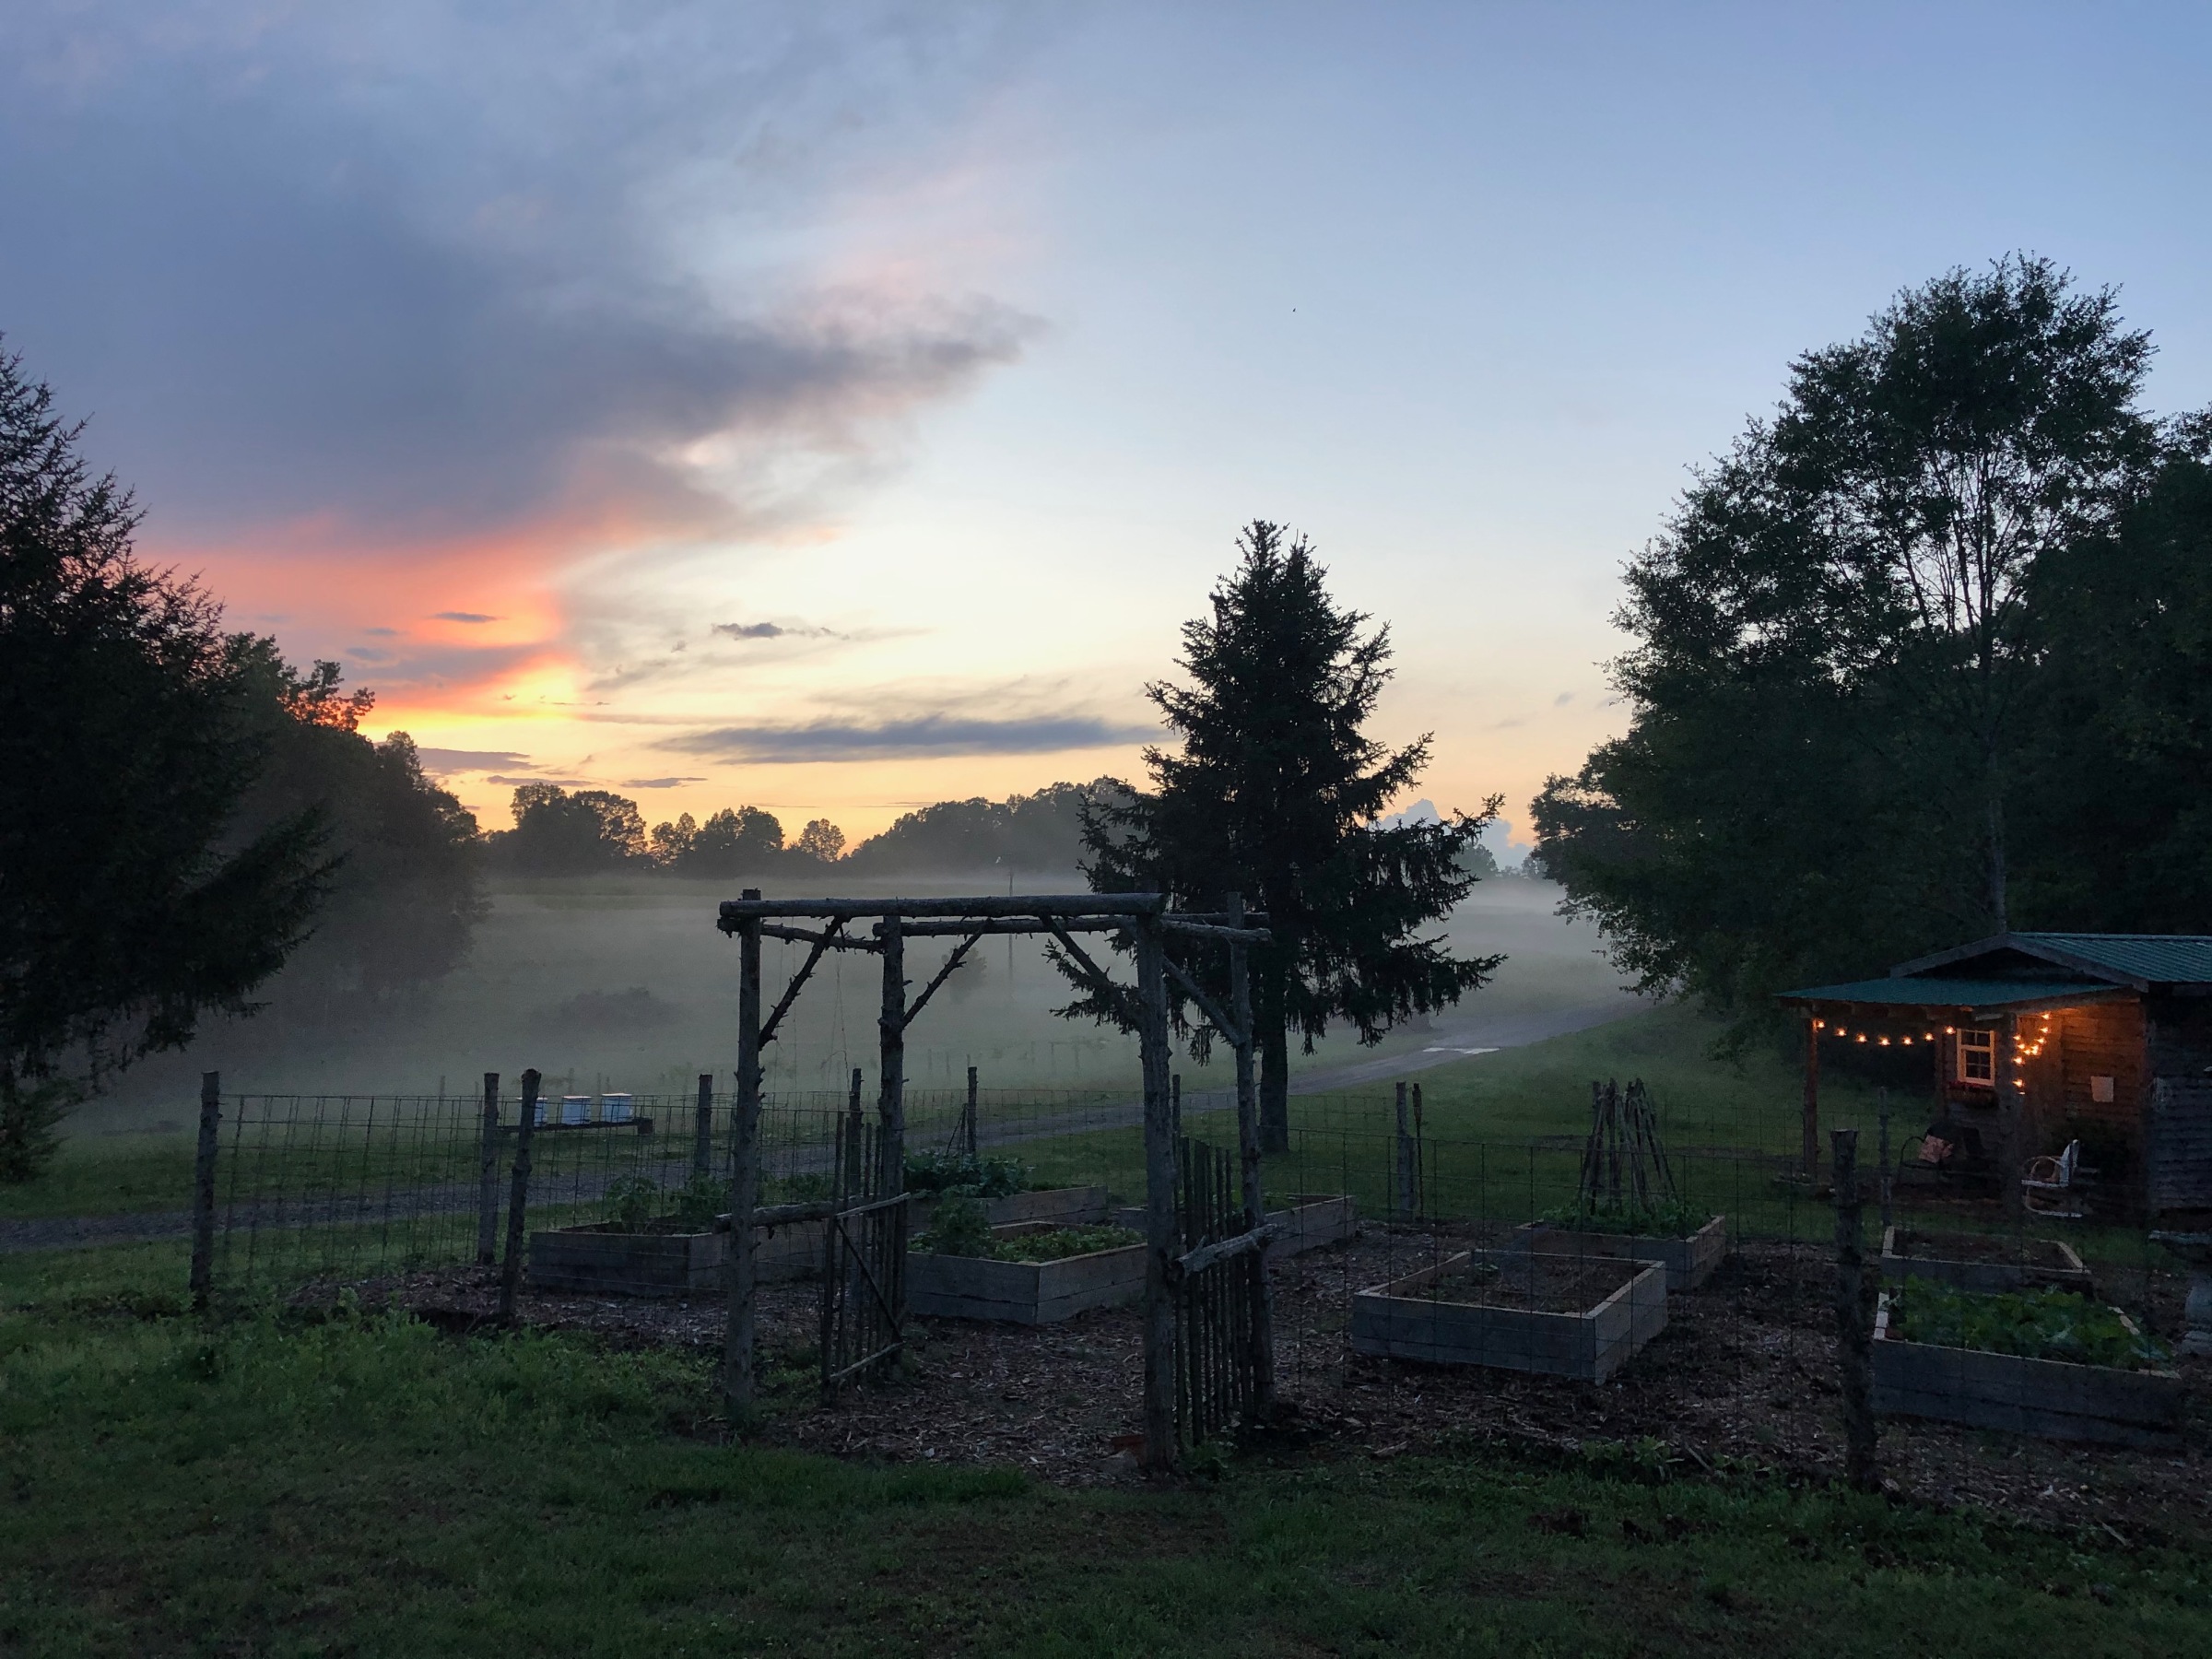 Sunset at The Farm